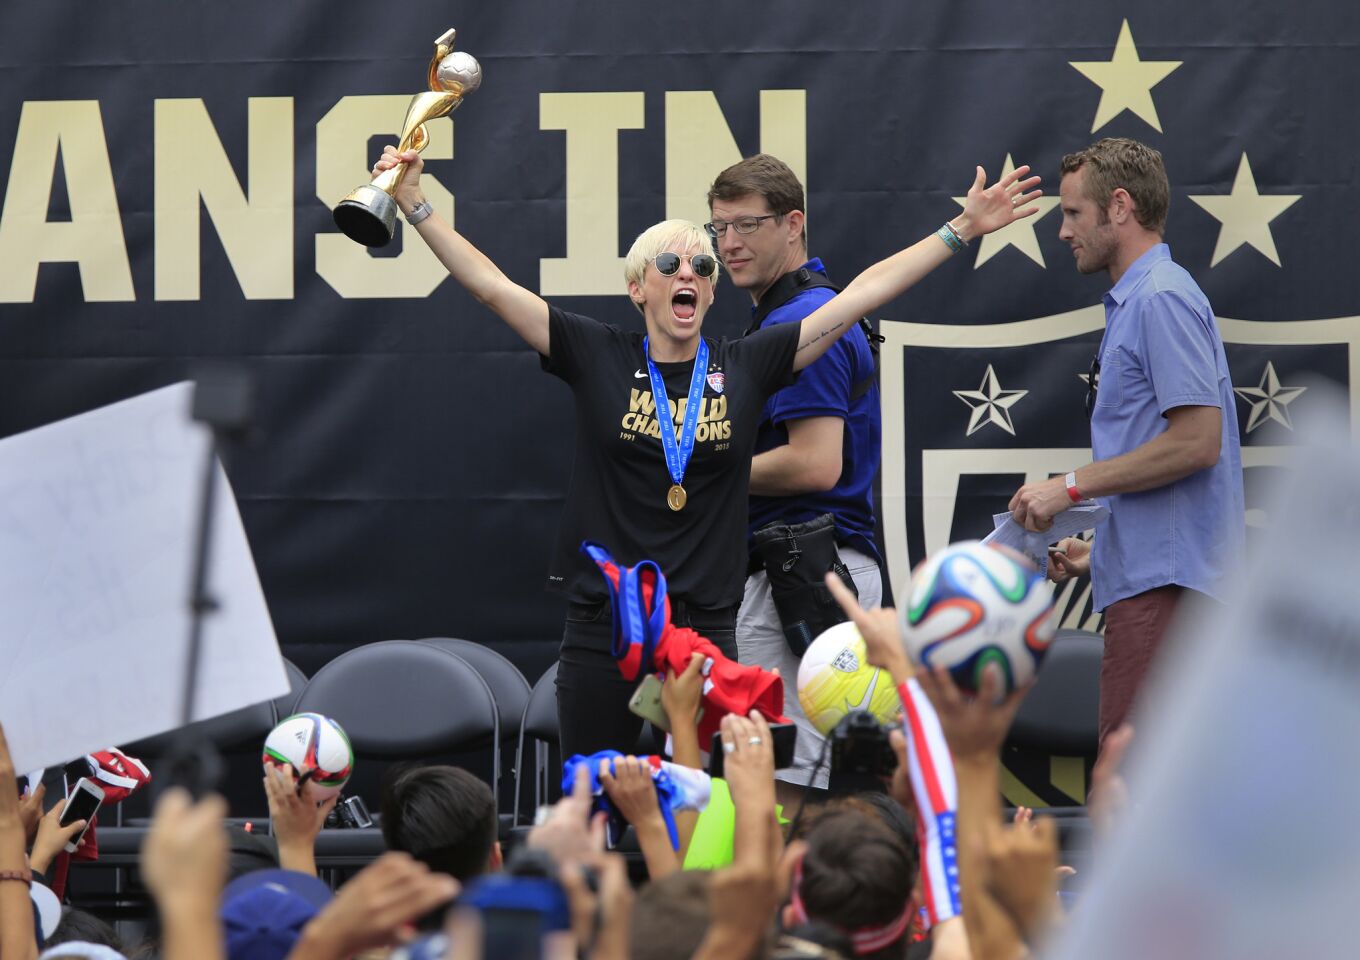 Midfielder Megan Rapinoe hoists the trophy the team was awarded for winning the Women's World Cup.